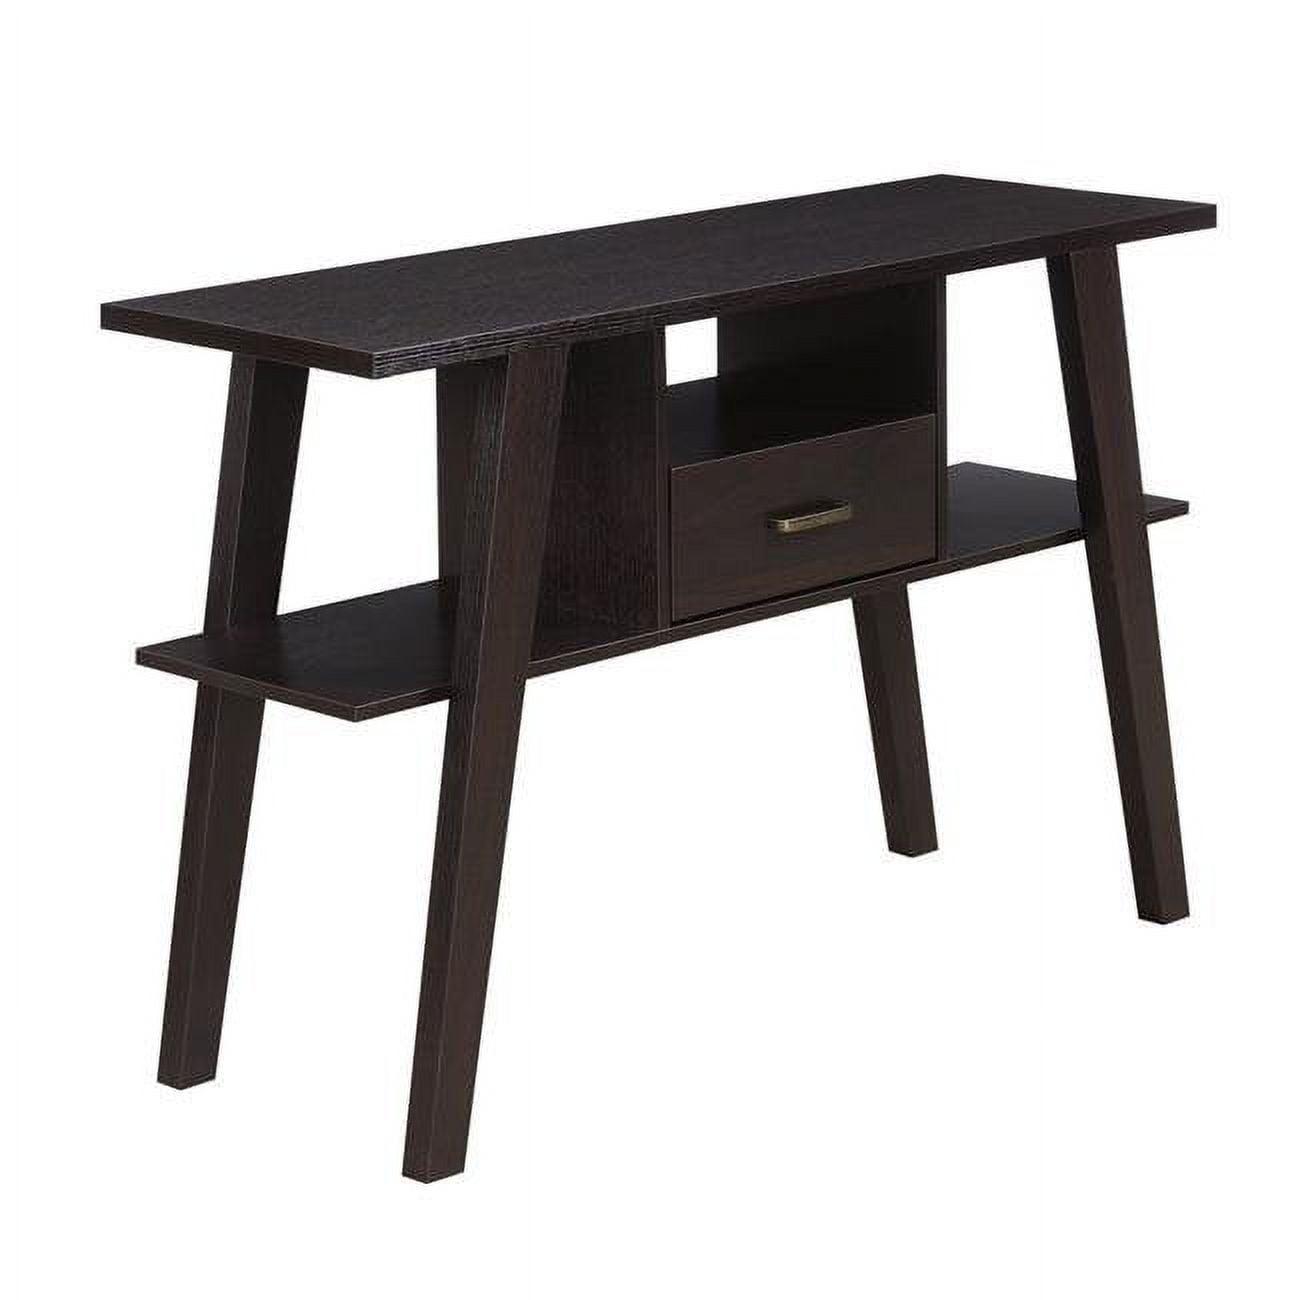 Newport Espresso 48" Metal & Wood Console Table with Storage